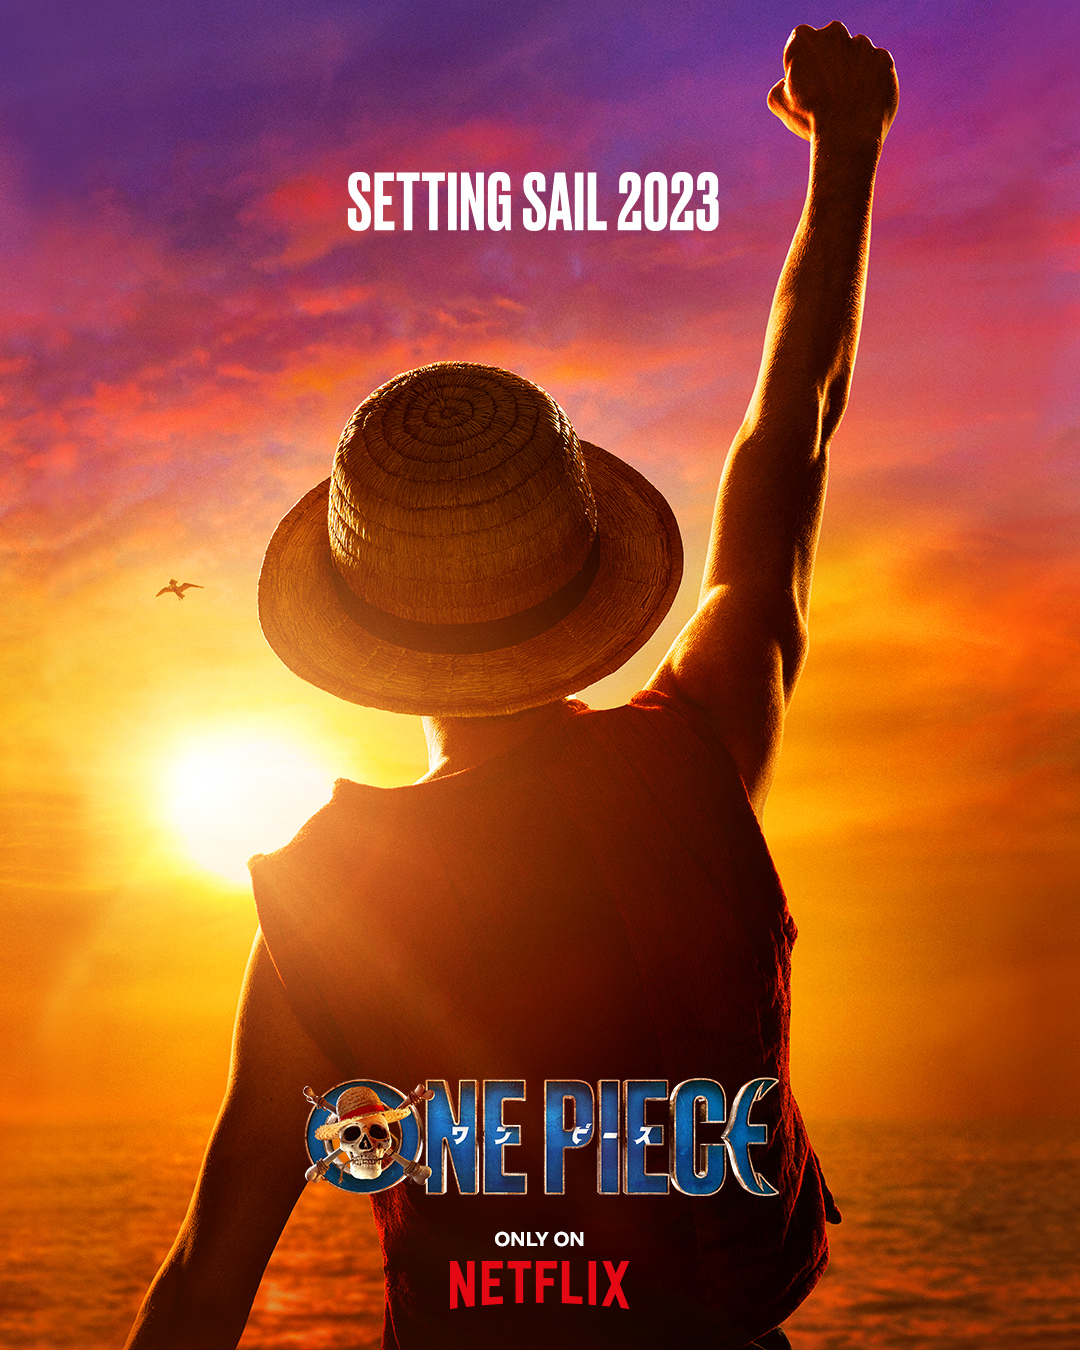 1 piece - "One Piece" Netflix’s Pirate Adventure Series Shot in South Africa To Debut in 2023